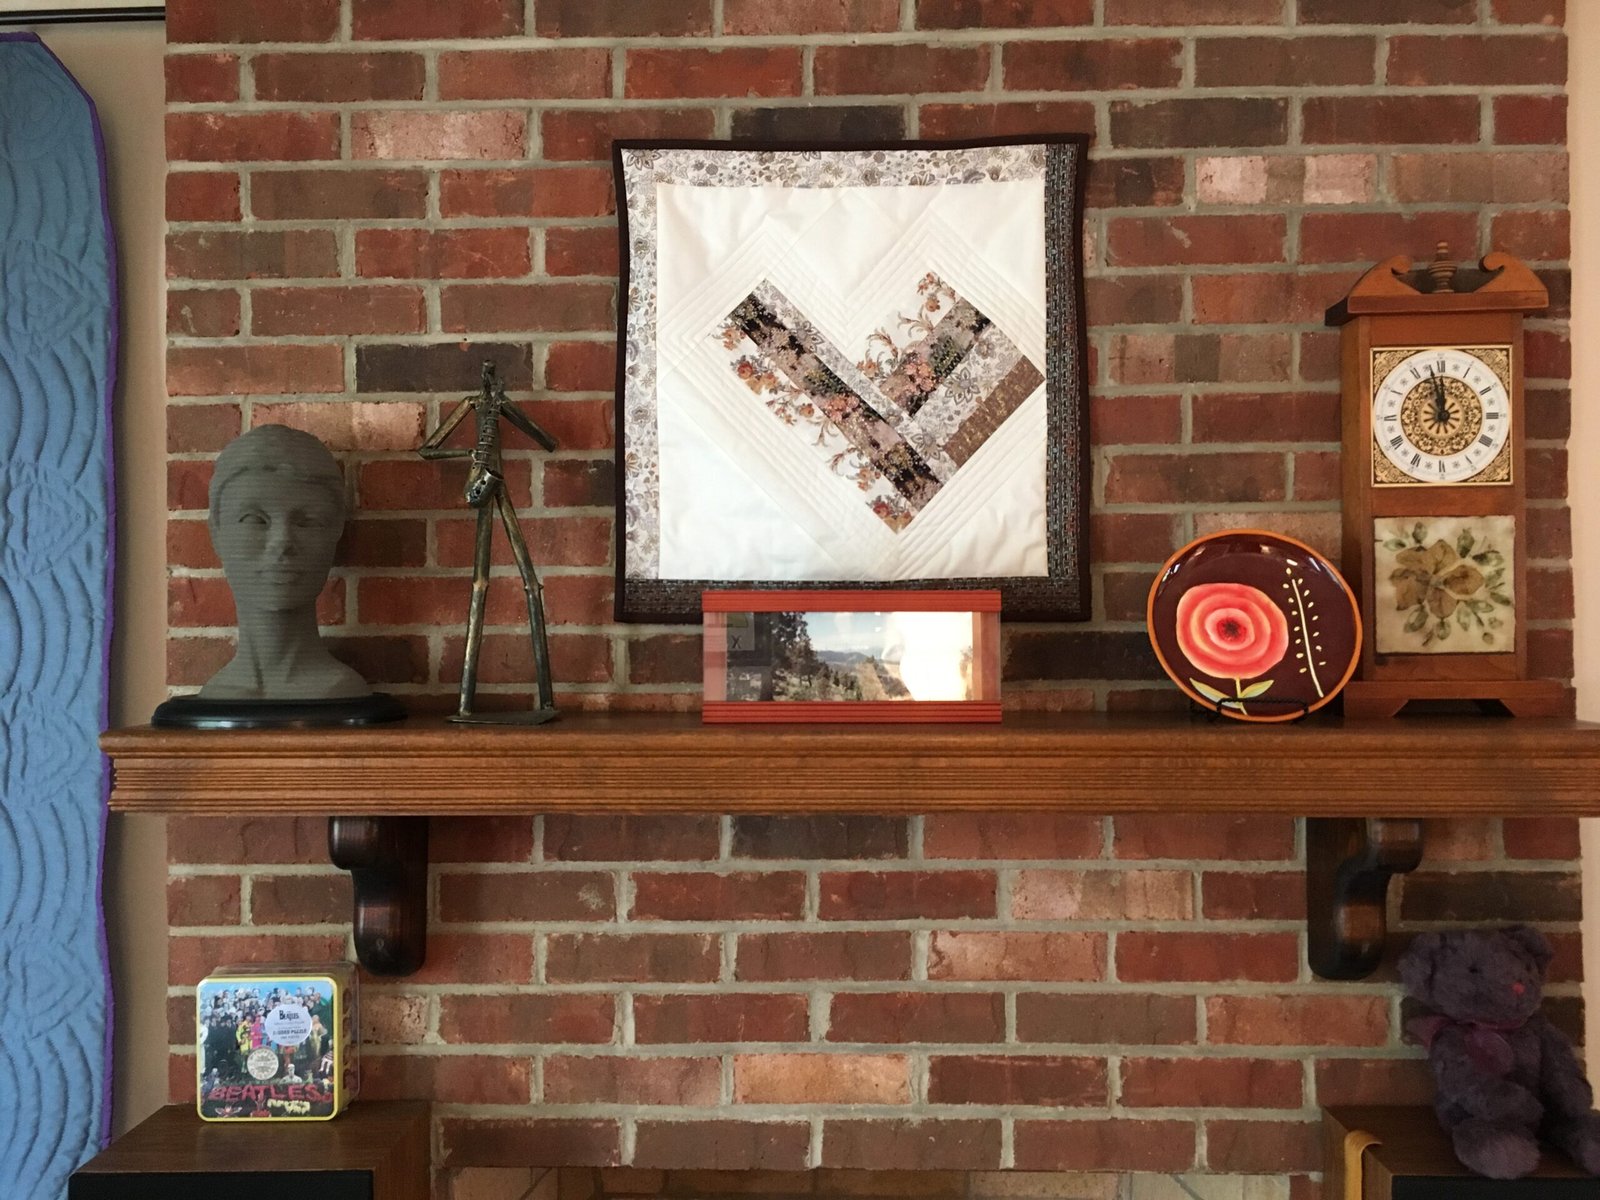 Floating 'L' wall hanging on brick wall above fireplace